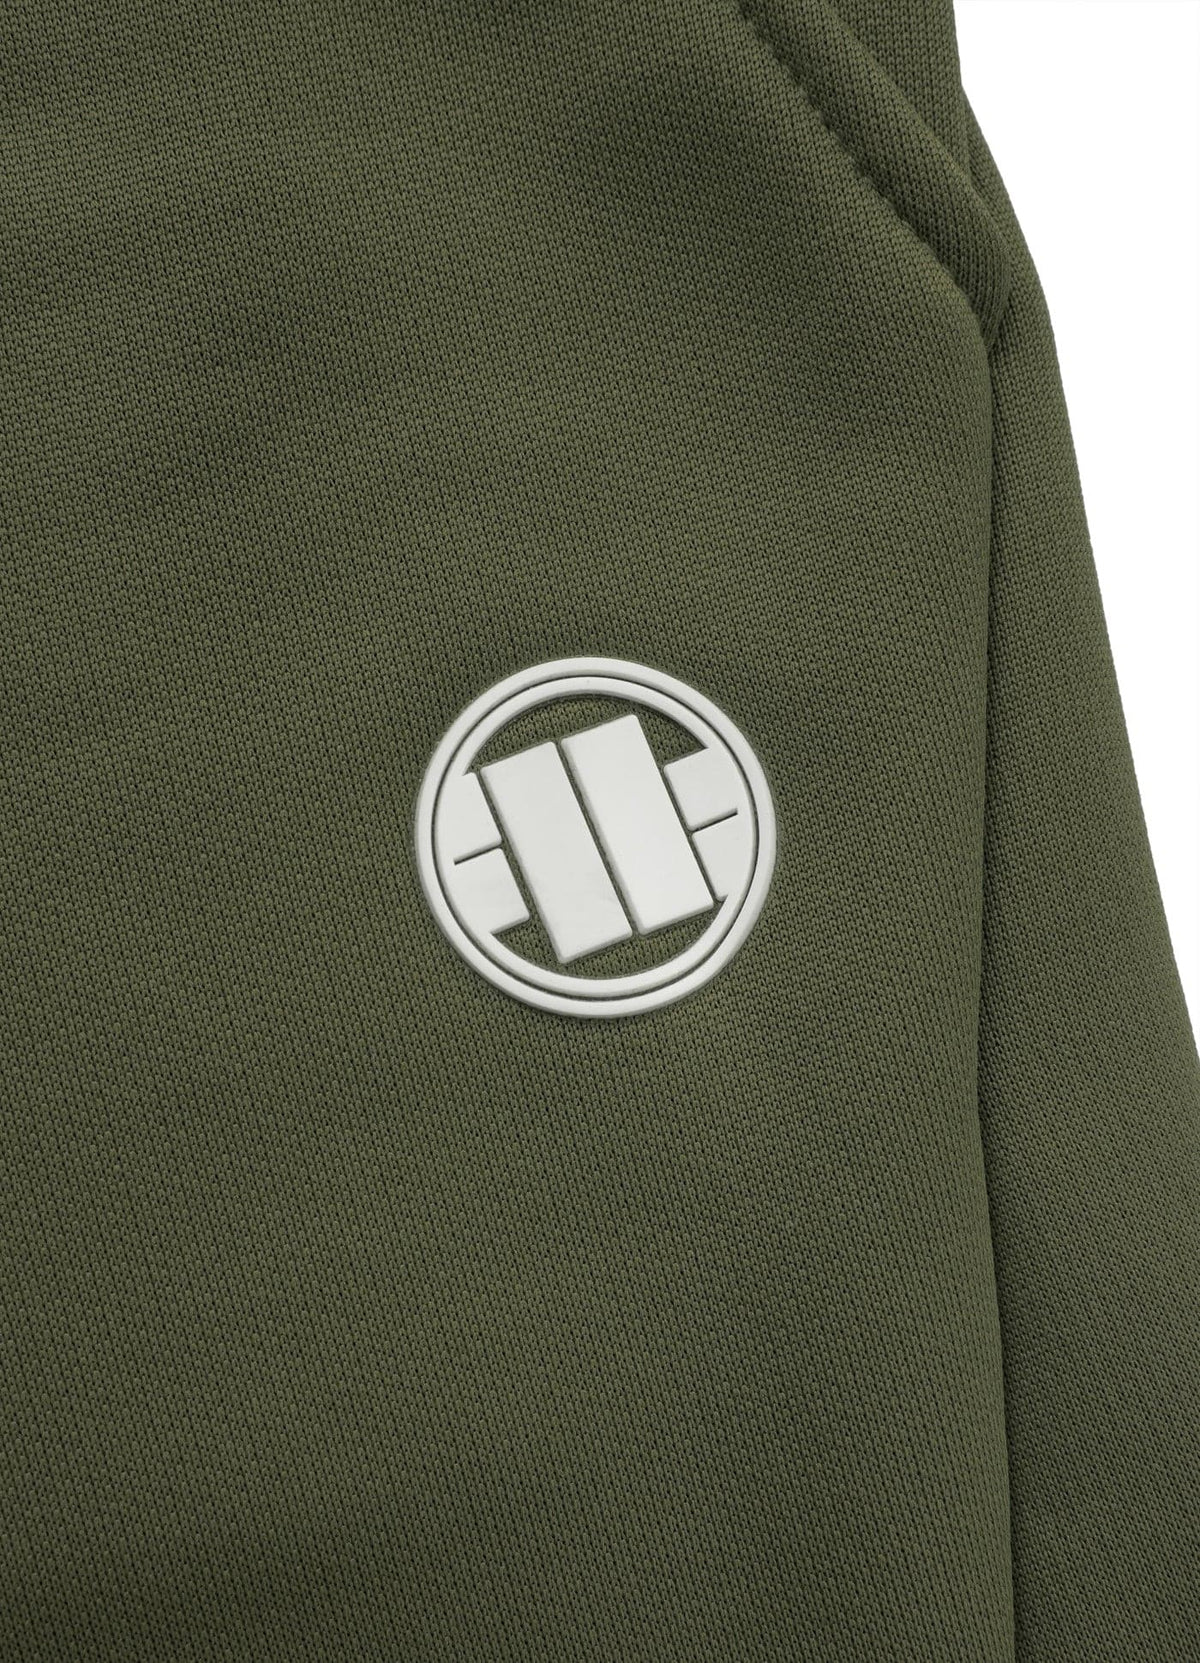 OLD SCHOOL SMALL LOGO Olive Track Pants.